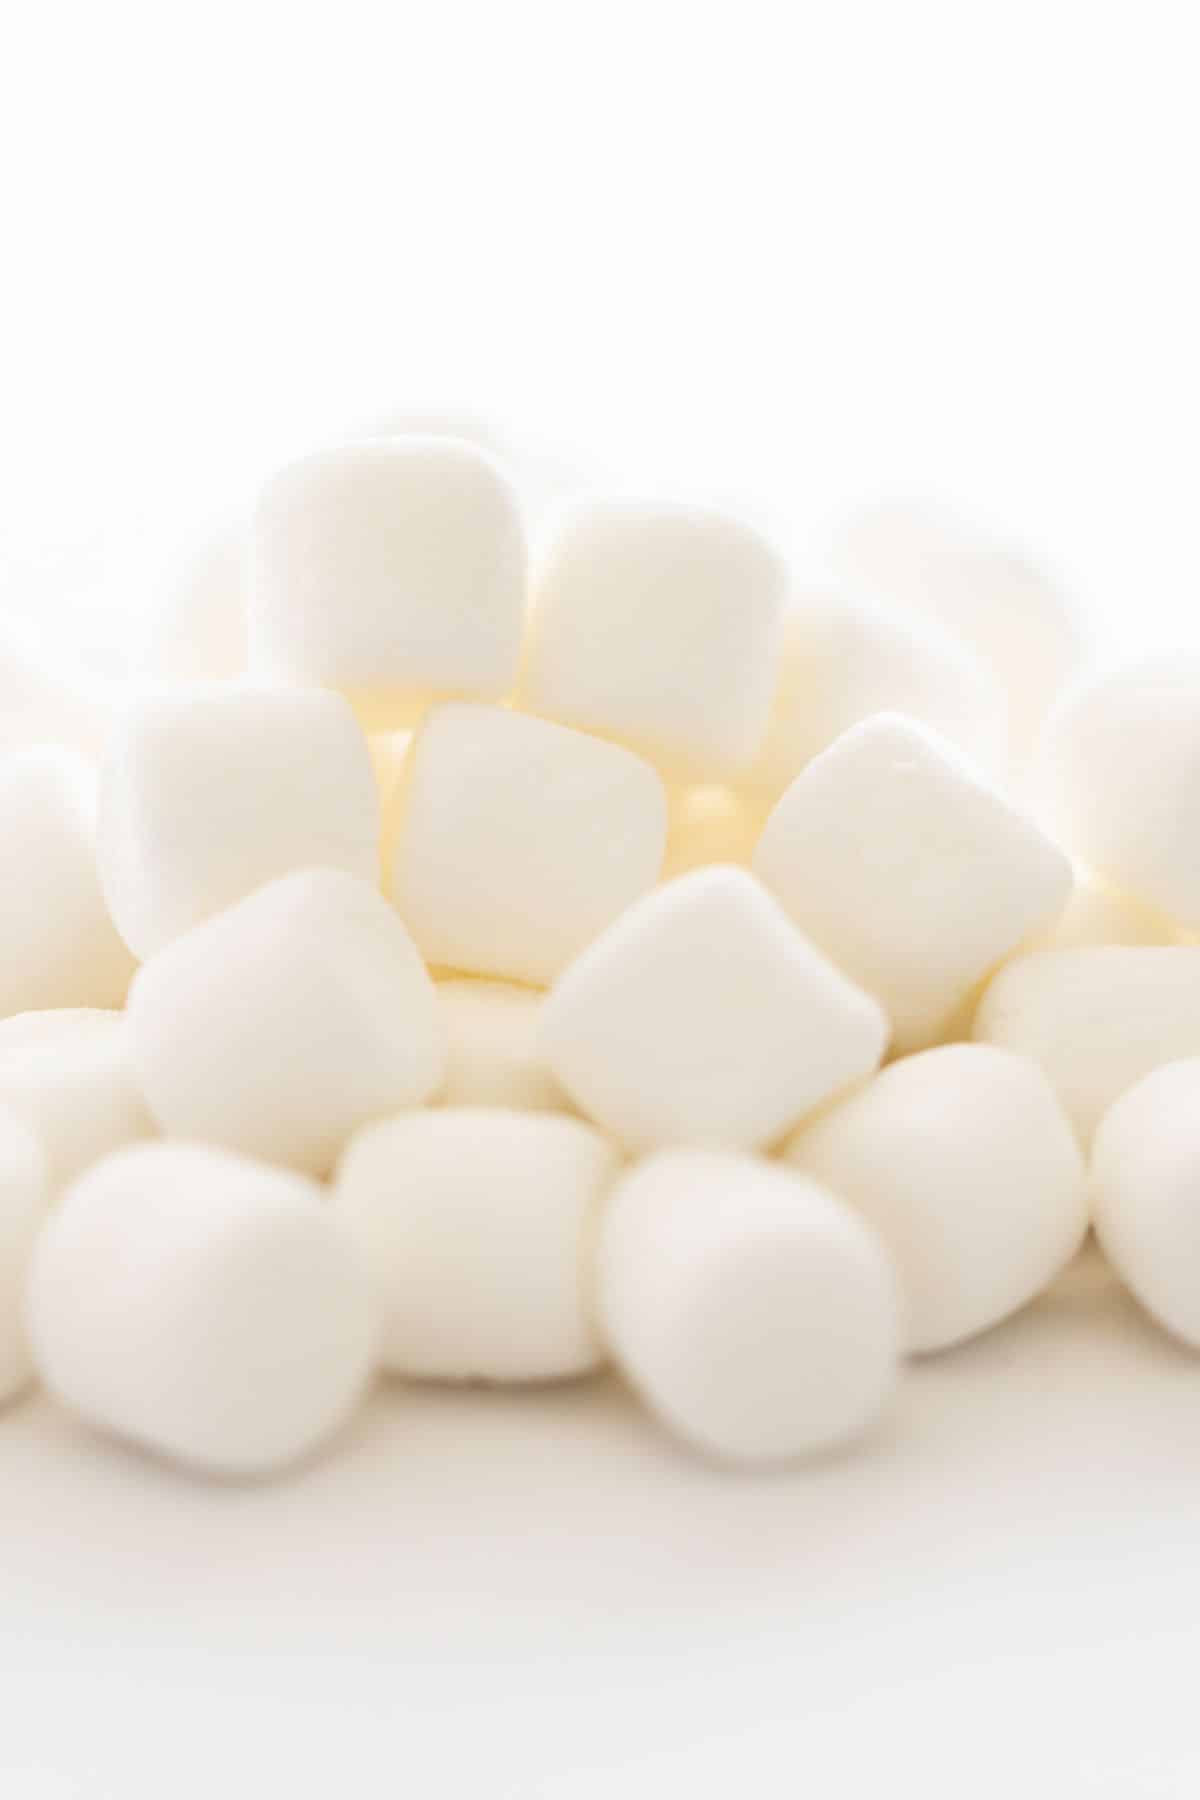 A pile of regular marshmallows on a white background.